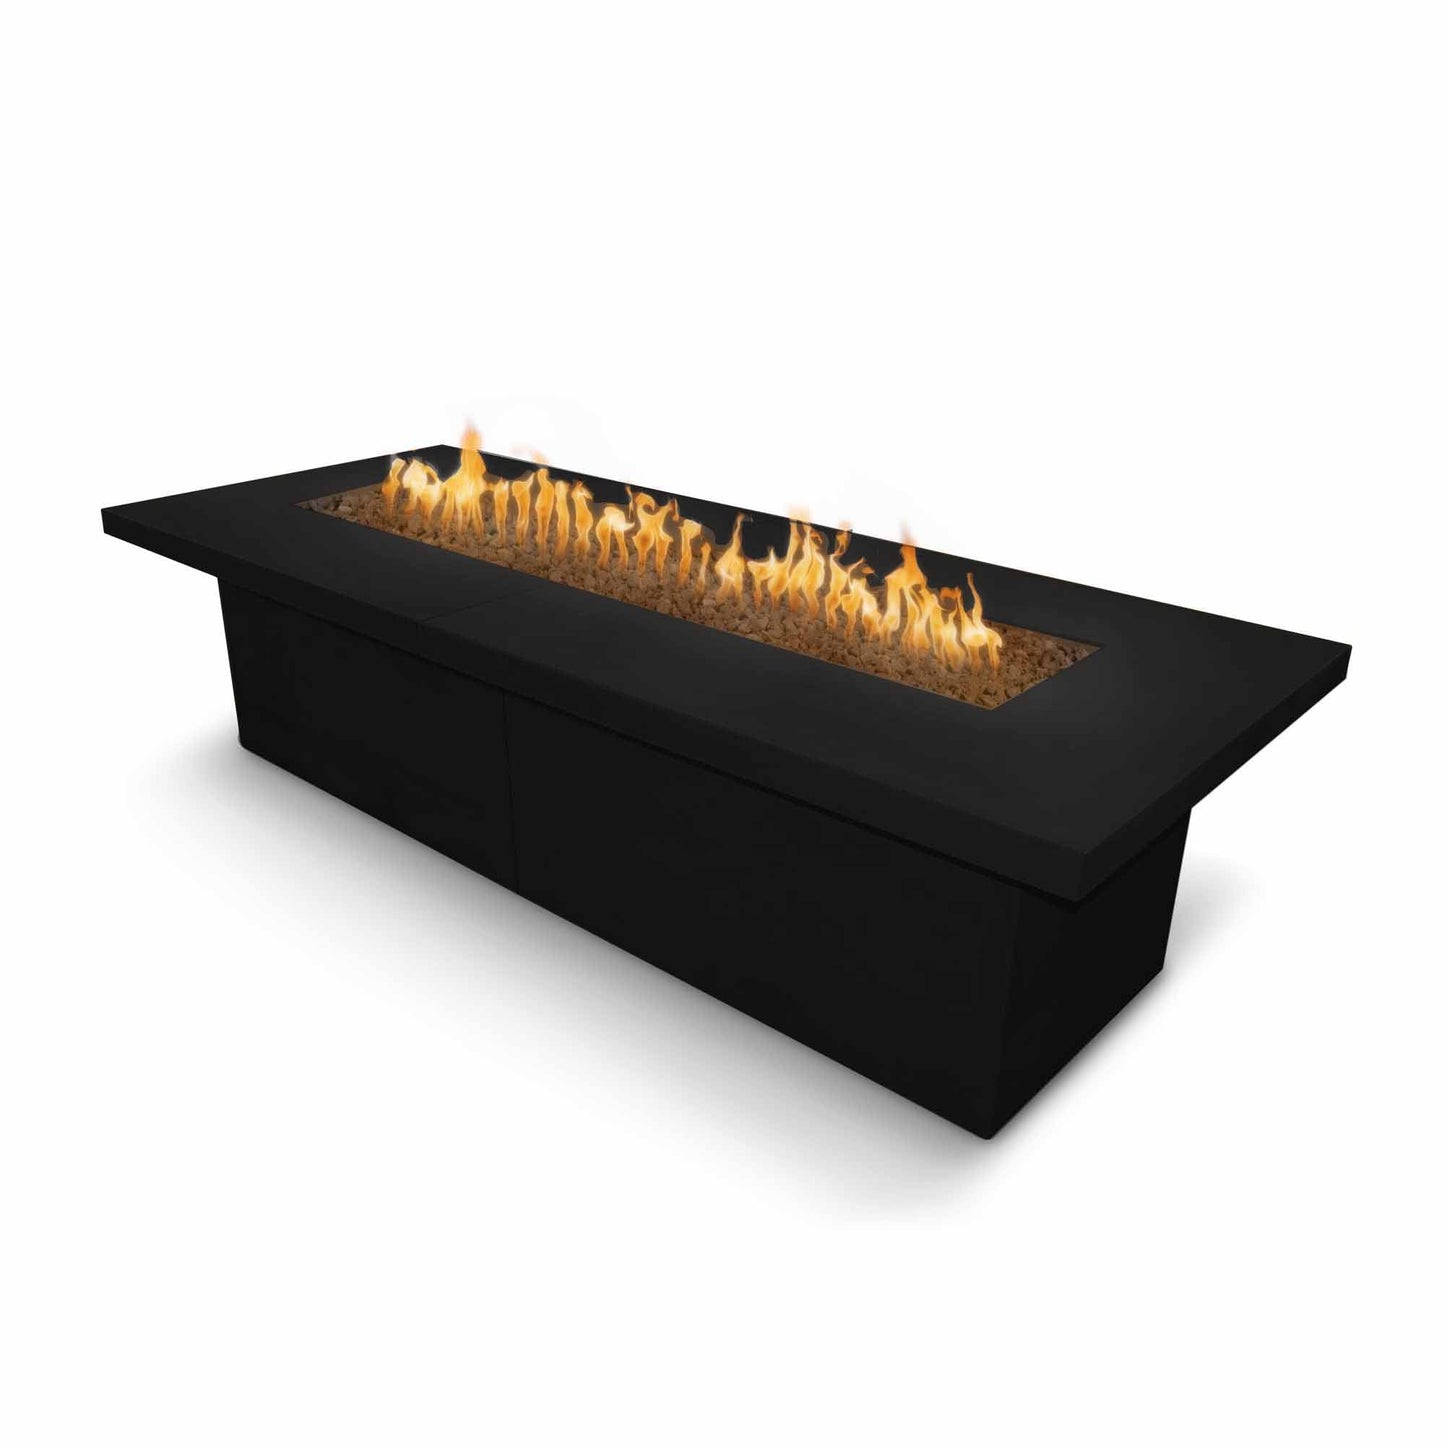 The Outdoor Plus Rectangular Newport 72" Java Powder Coated Metal Liquid Propane Fire Pit with Match Lit with Flame Sense Ignition